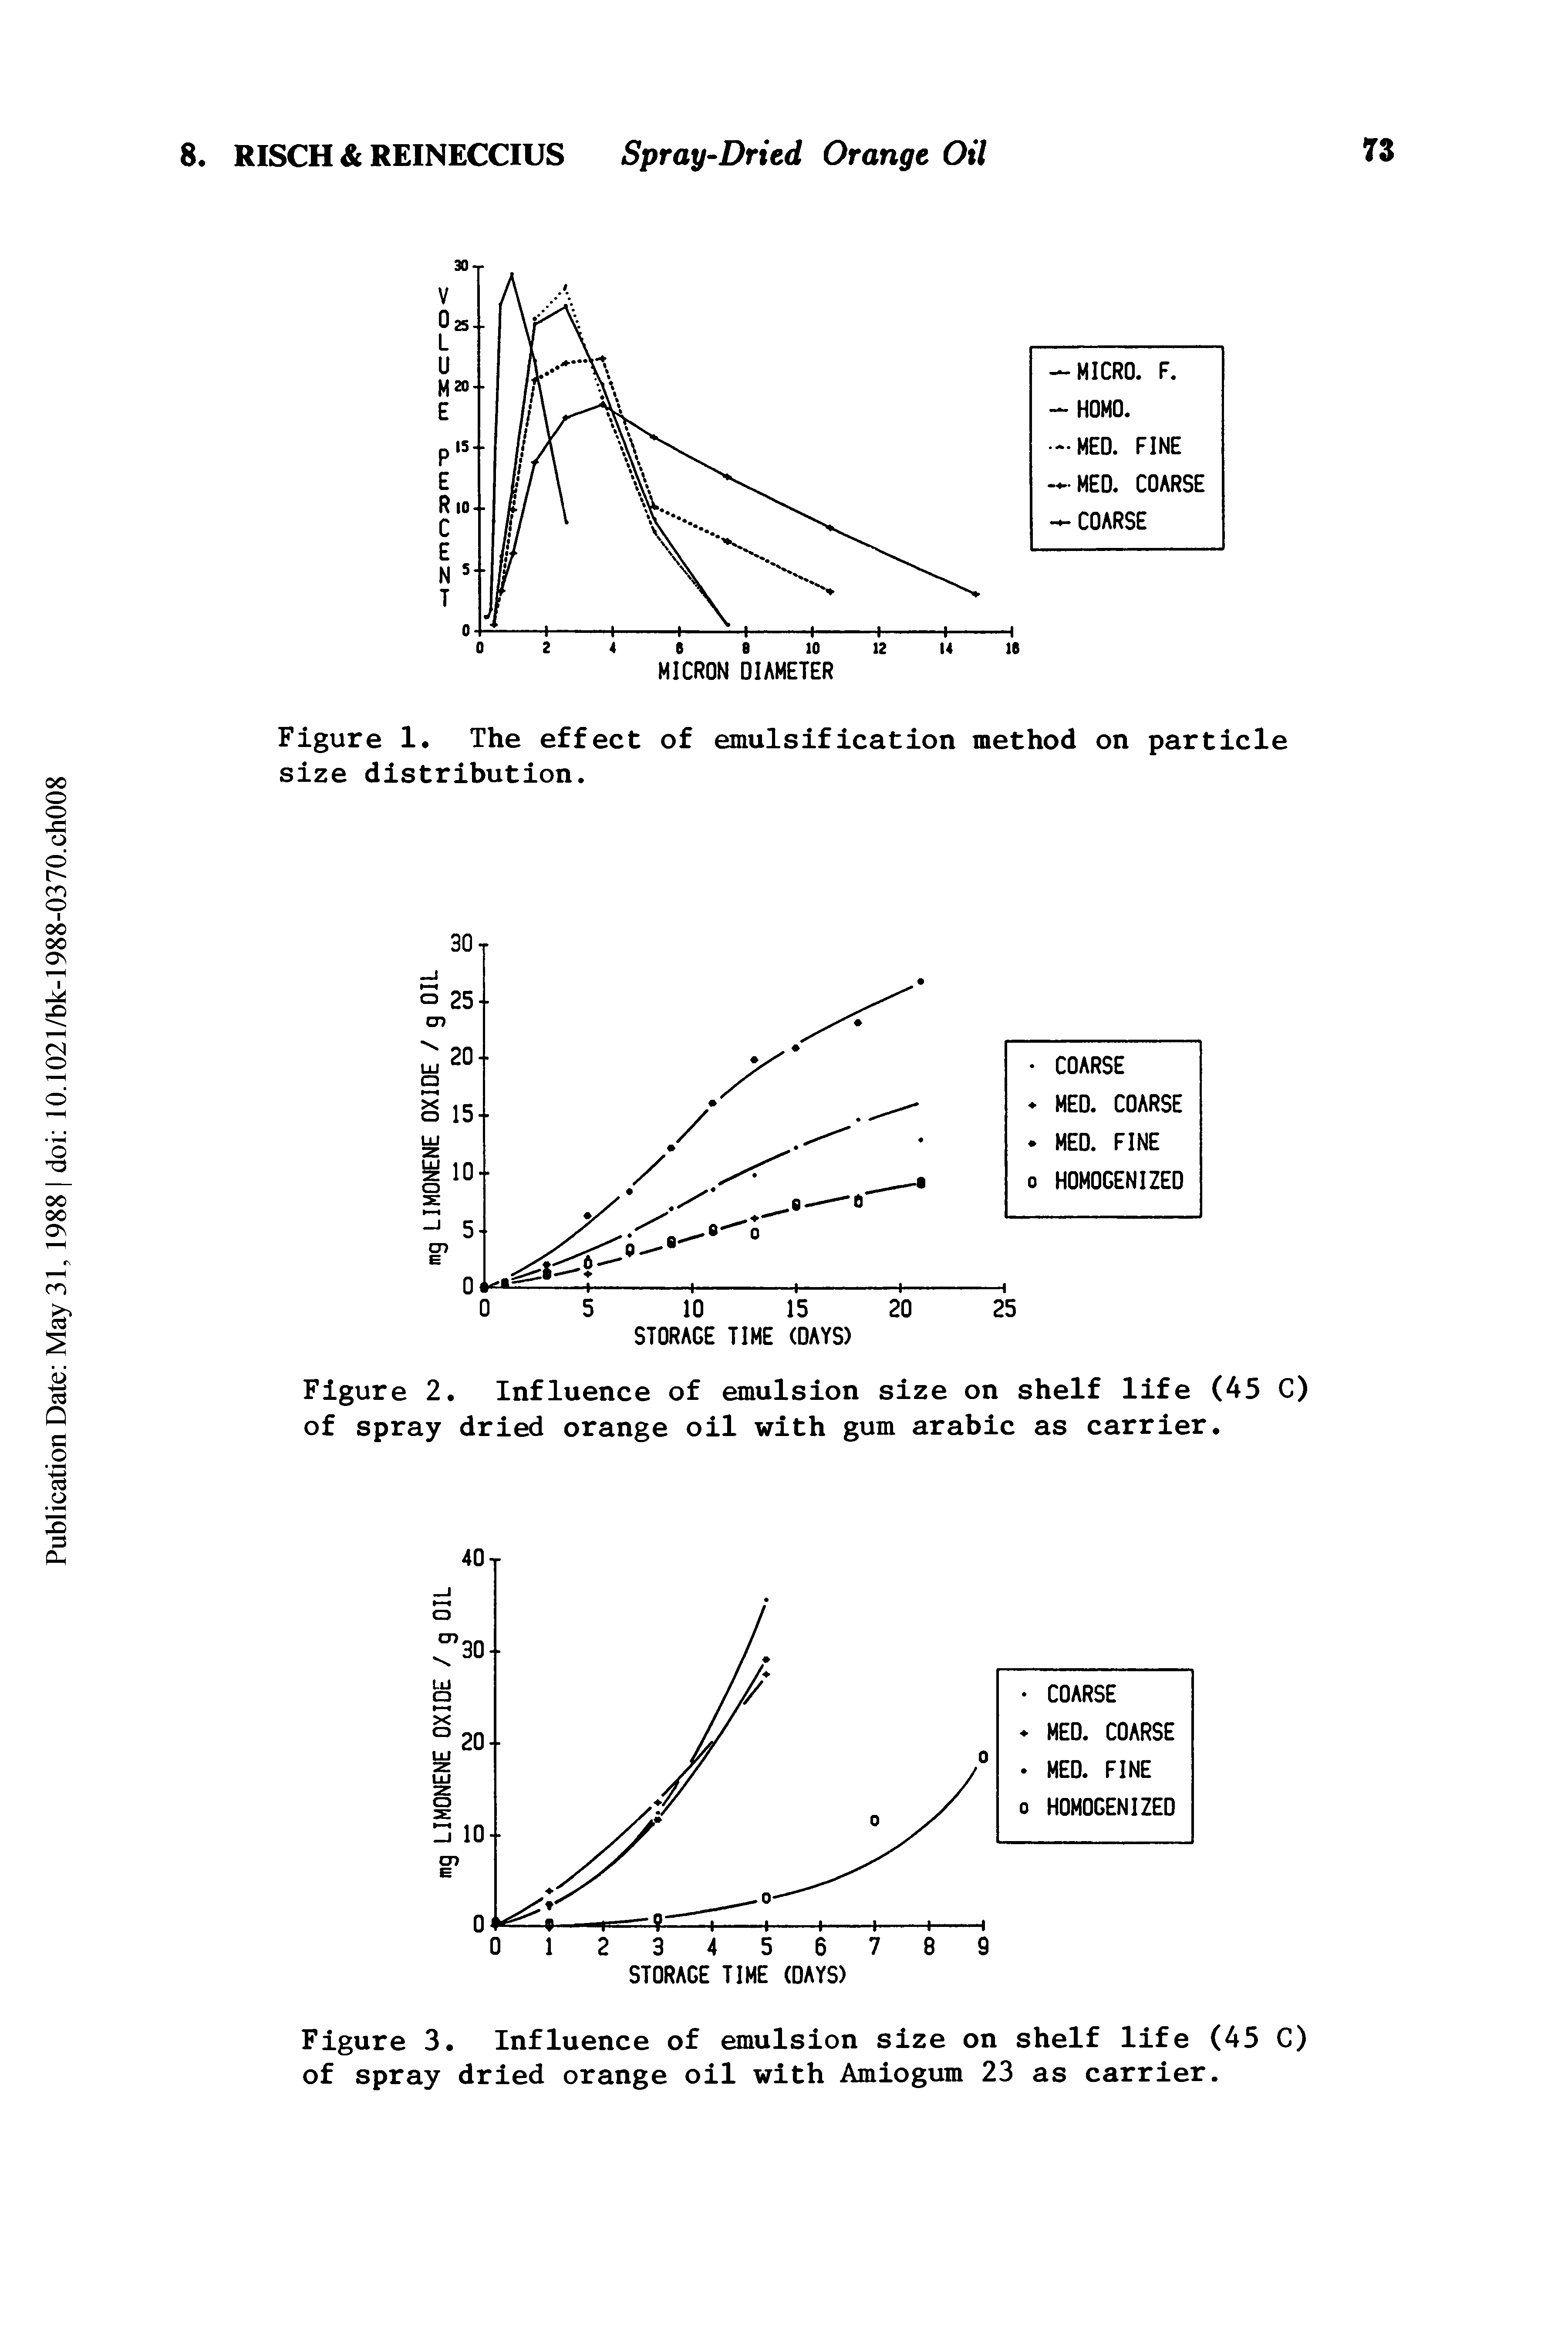 Figure 1. The effect of emulsification method on particle size distribution.